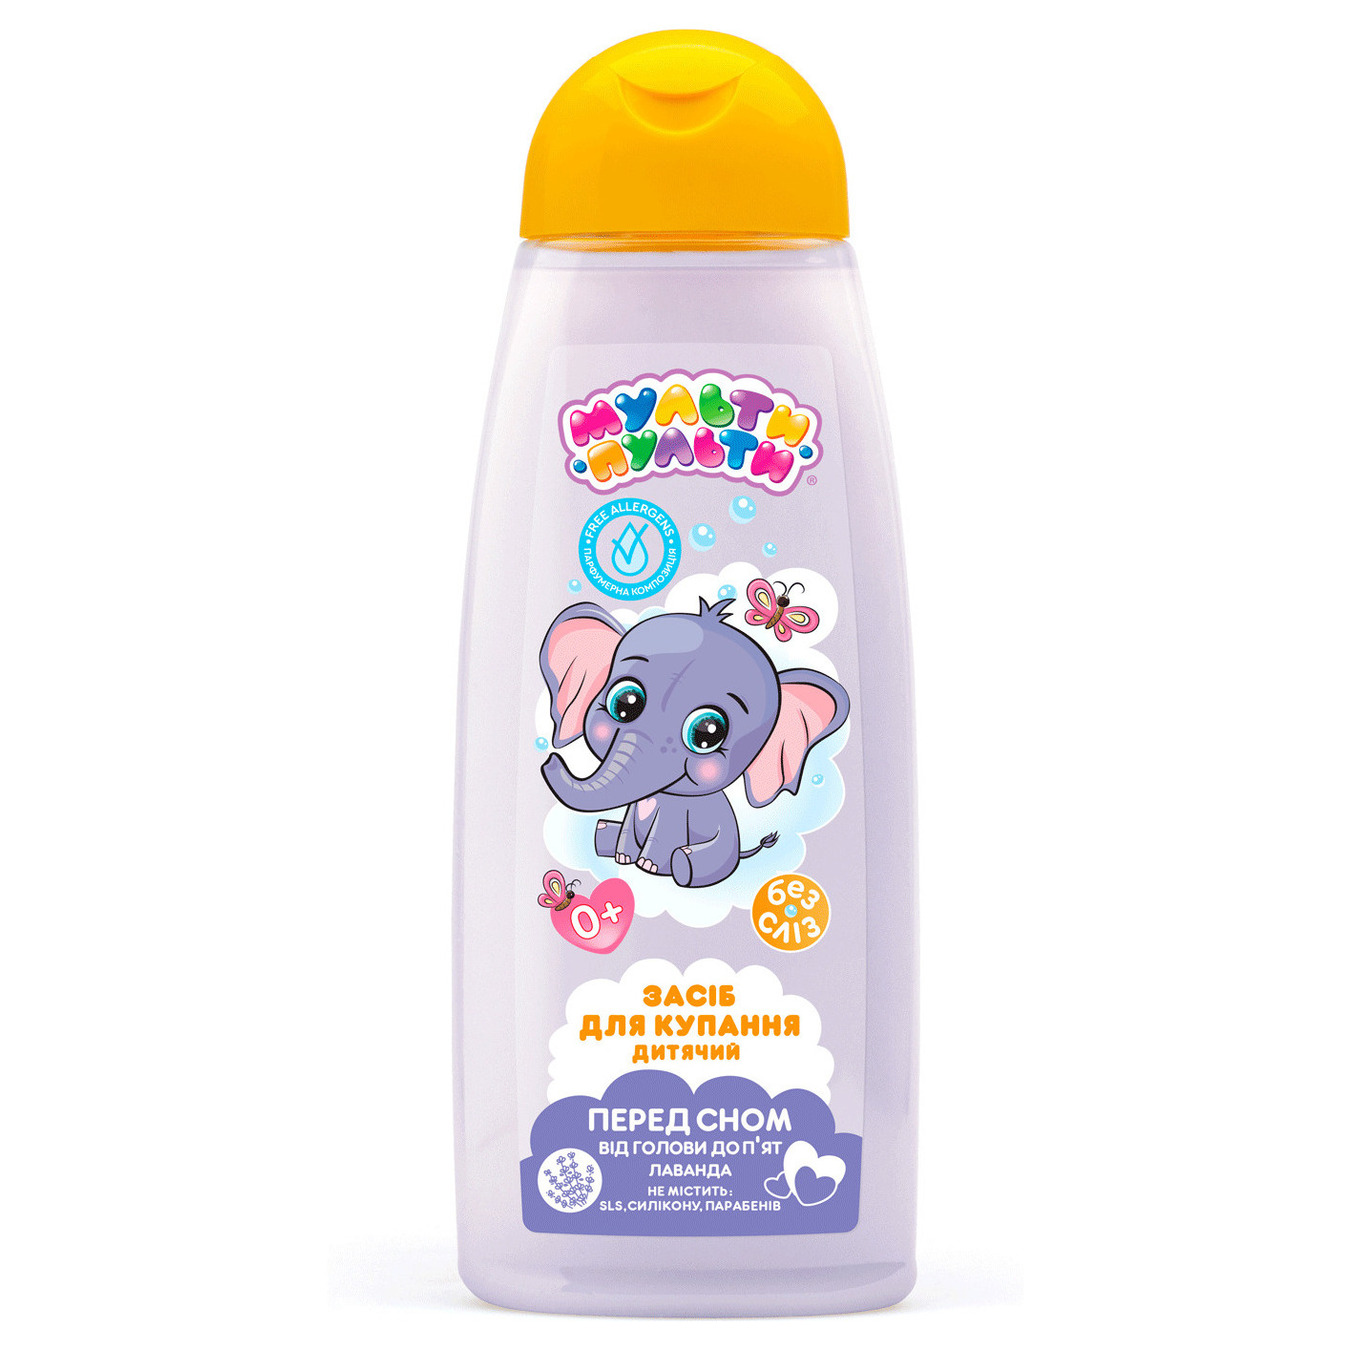 Shampoo-foam Multi-Pulti From head to toe for children from 0 years Lavender 430 g